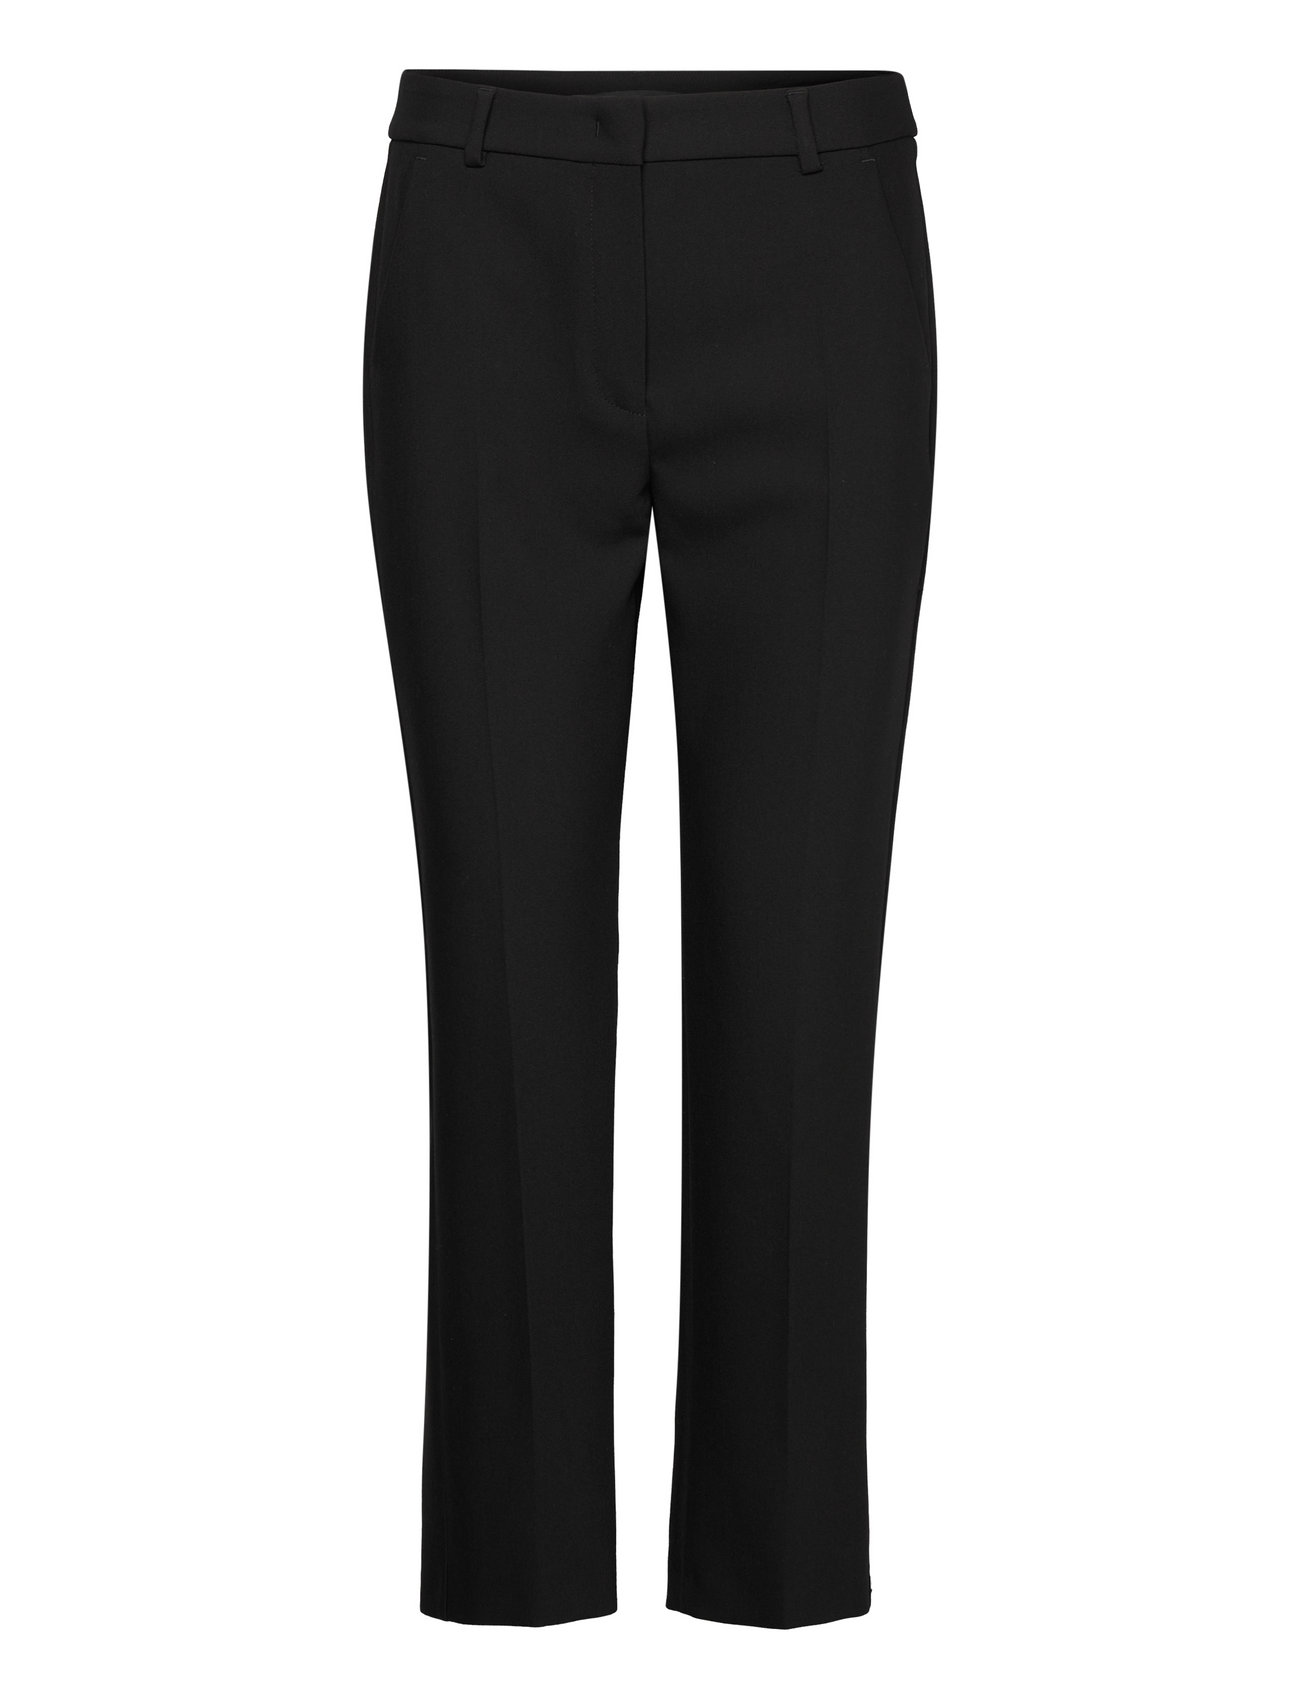 Patata Bottoms Trousers Suitpants Black Weekend Max Mara